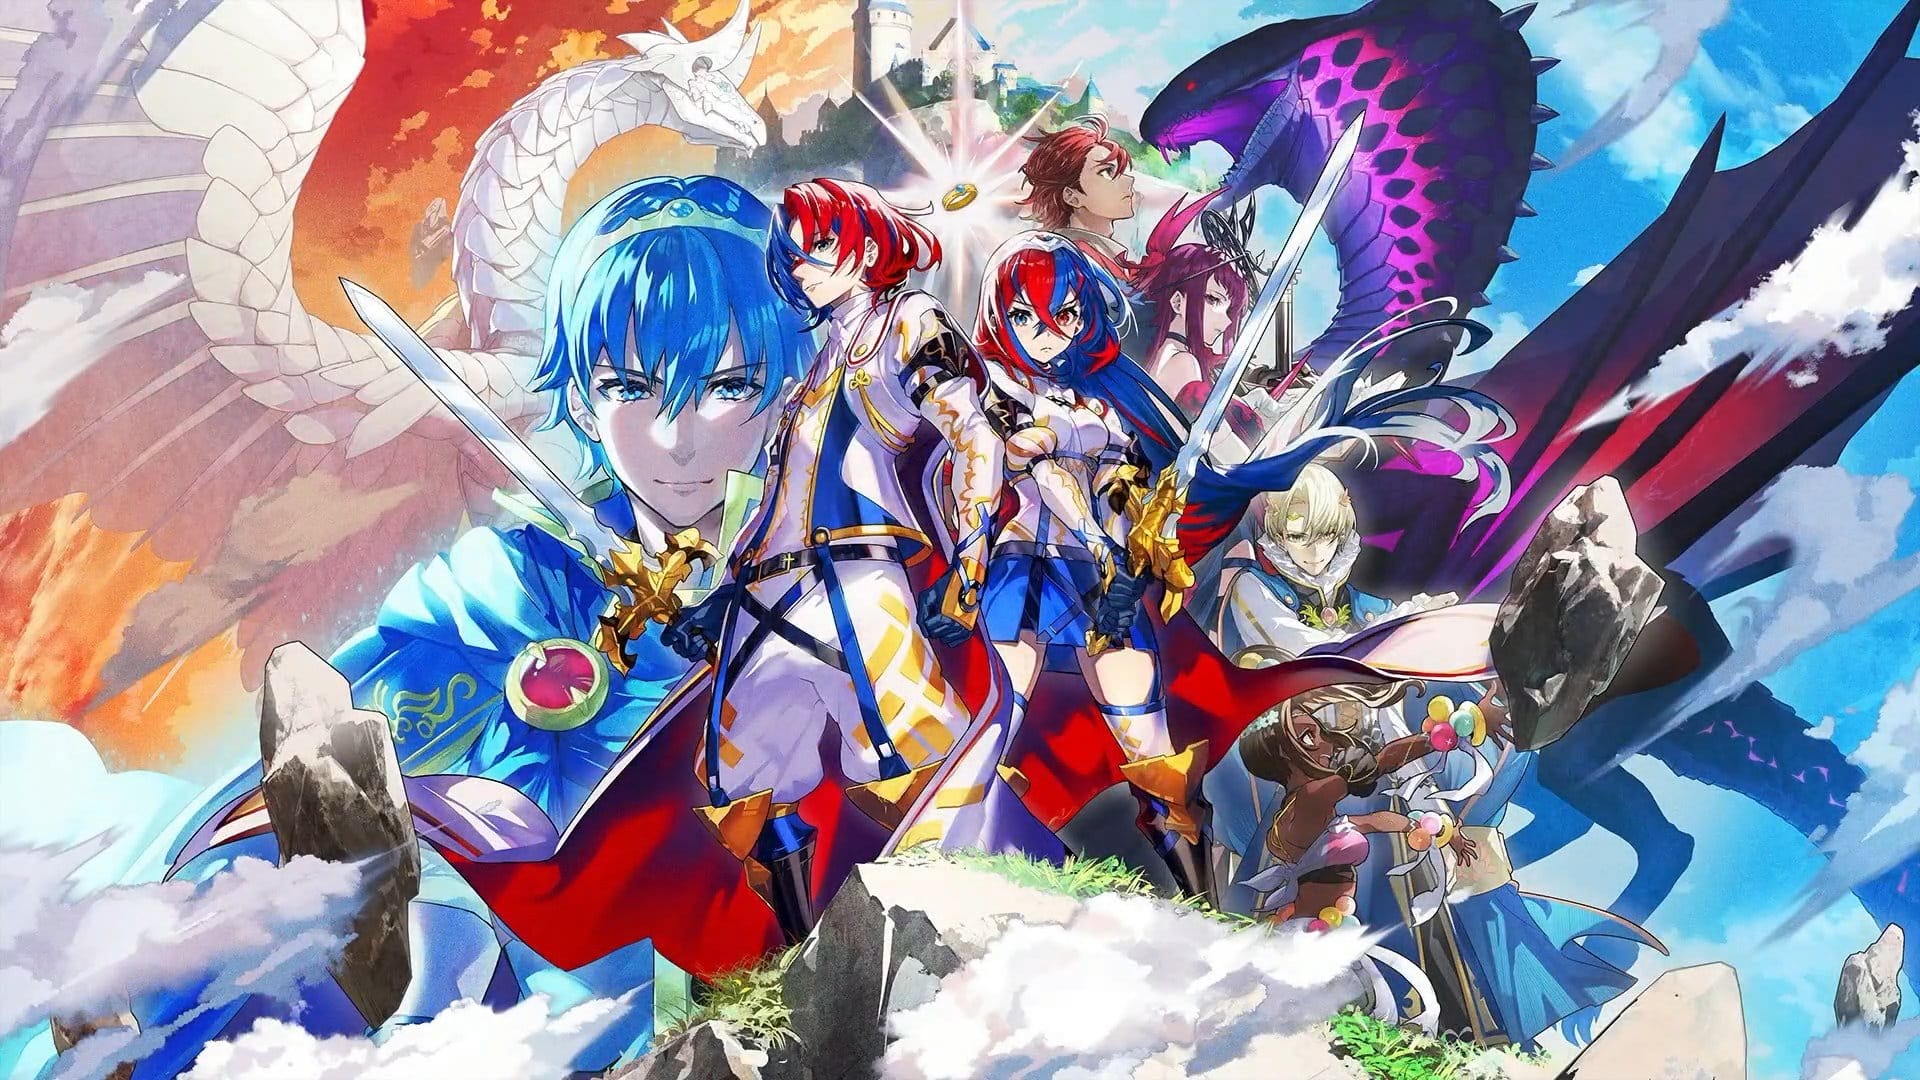 Fire Emblem Engage Announced as Next New Game in the Franchise